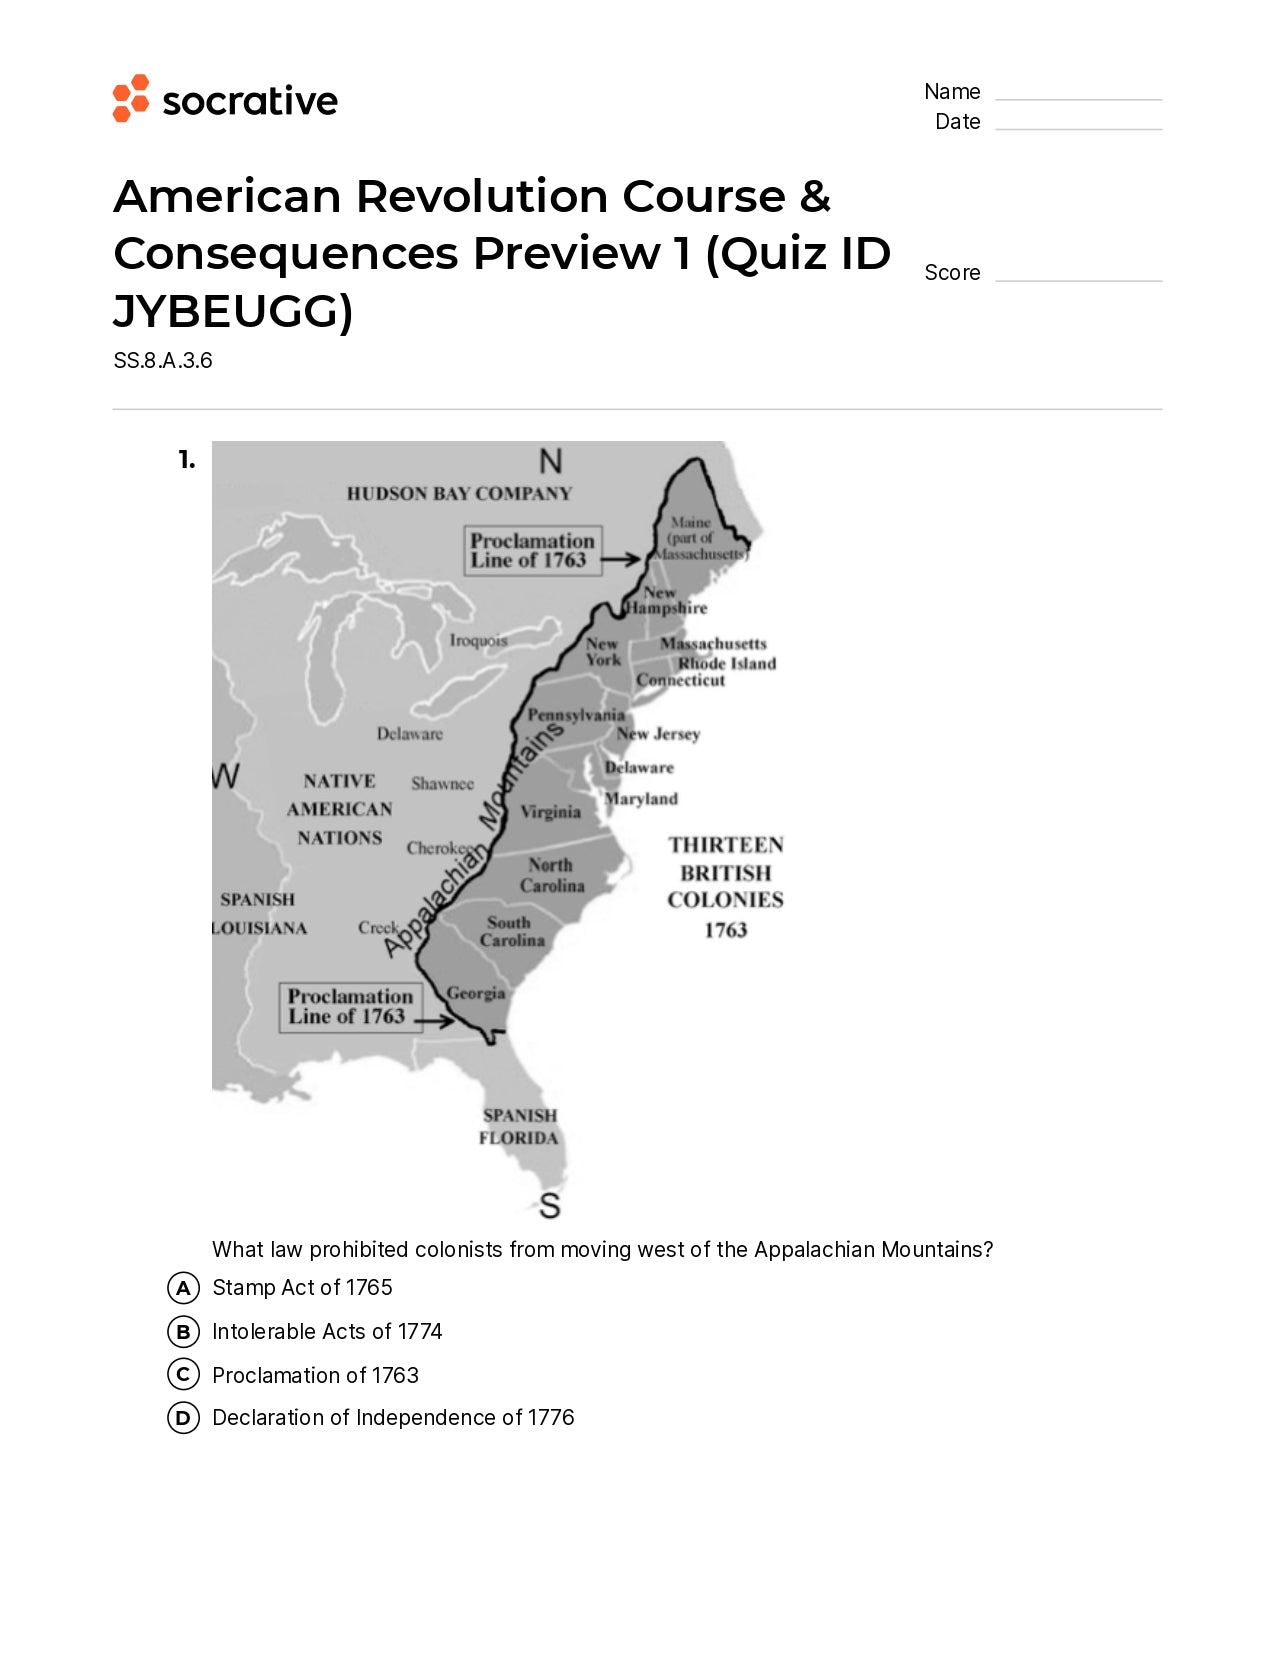 American Revolution Course & Consequences Preview 1